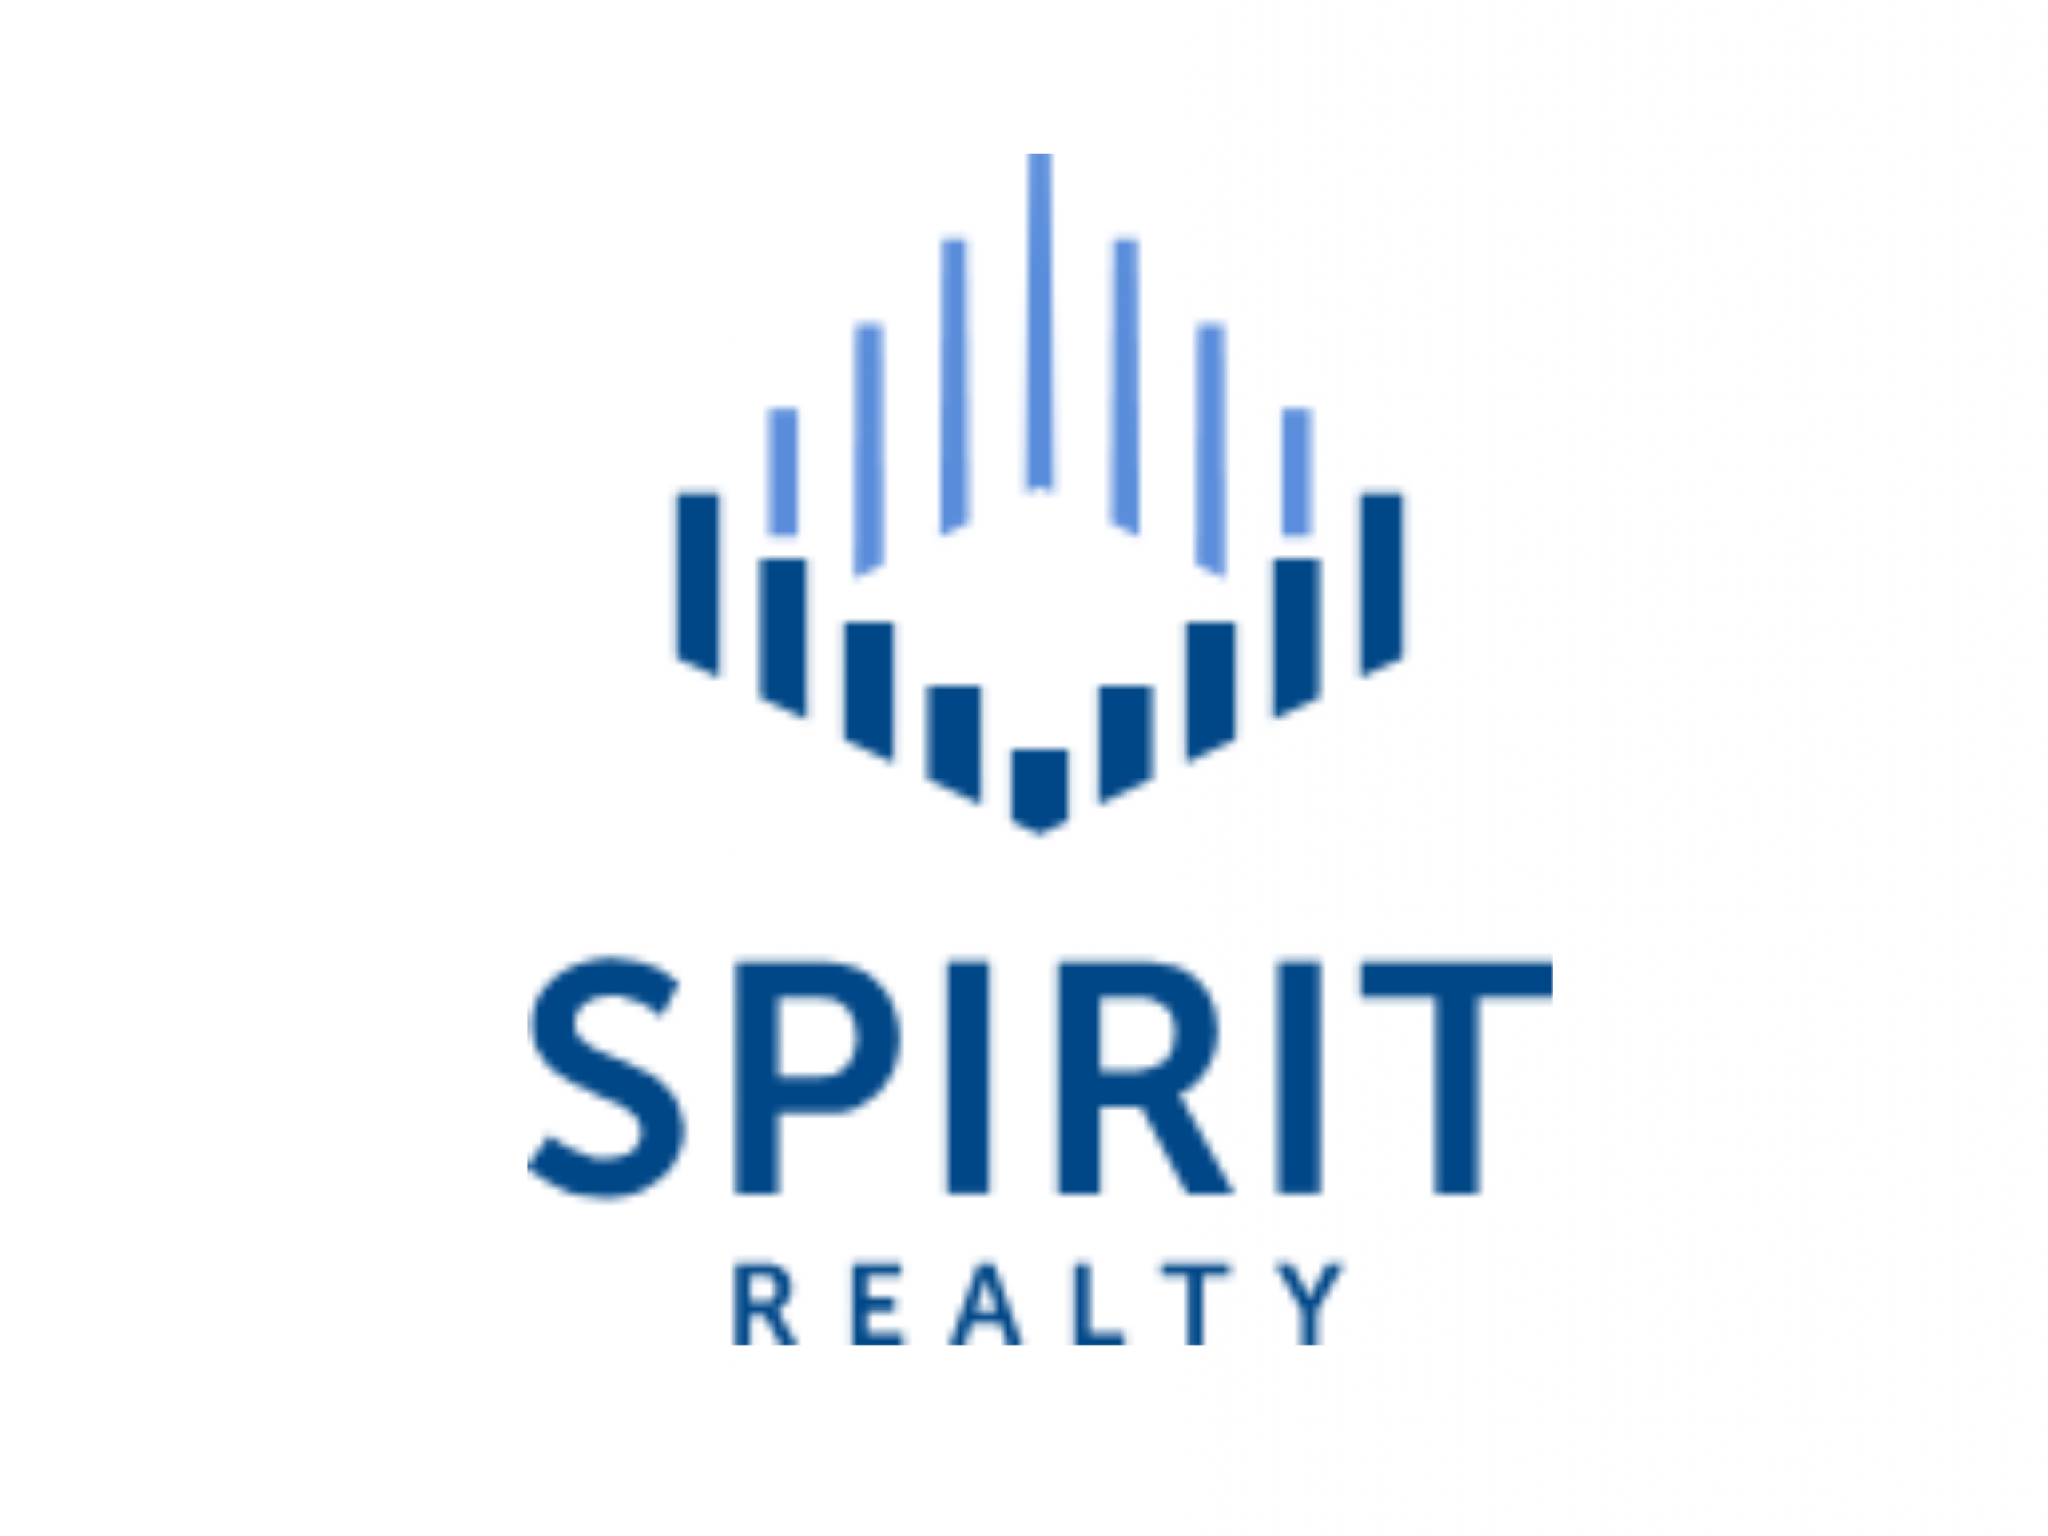  why-net-lease-reit-spirit-realty-capitals-shares-jumping-today 